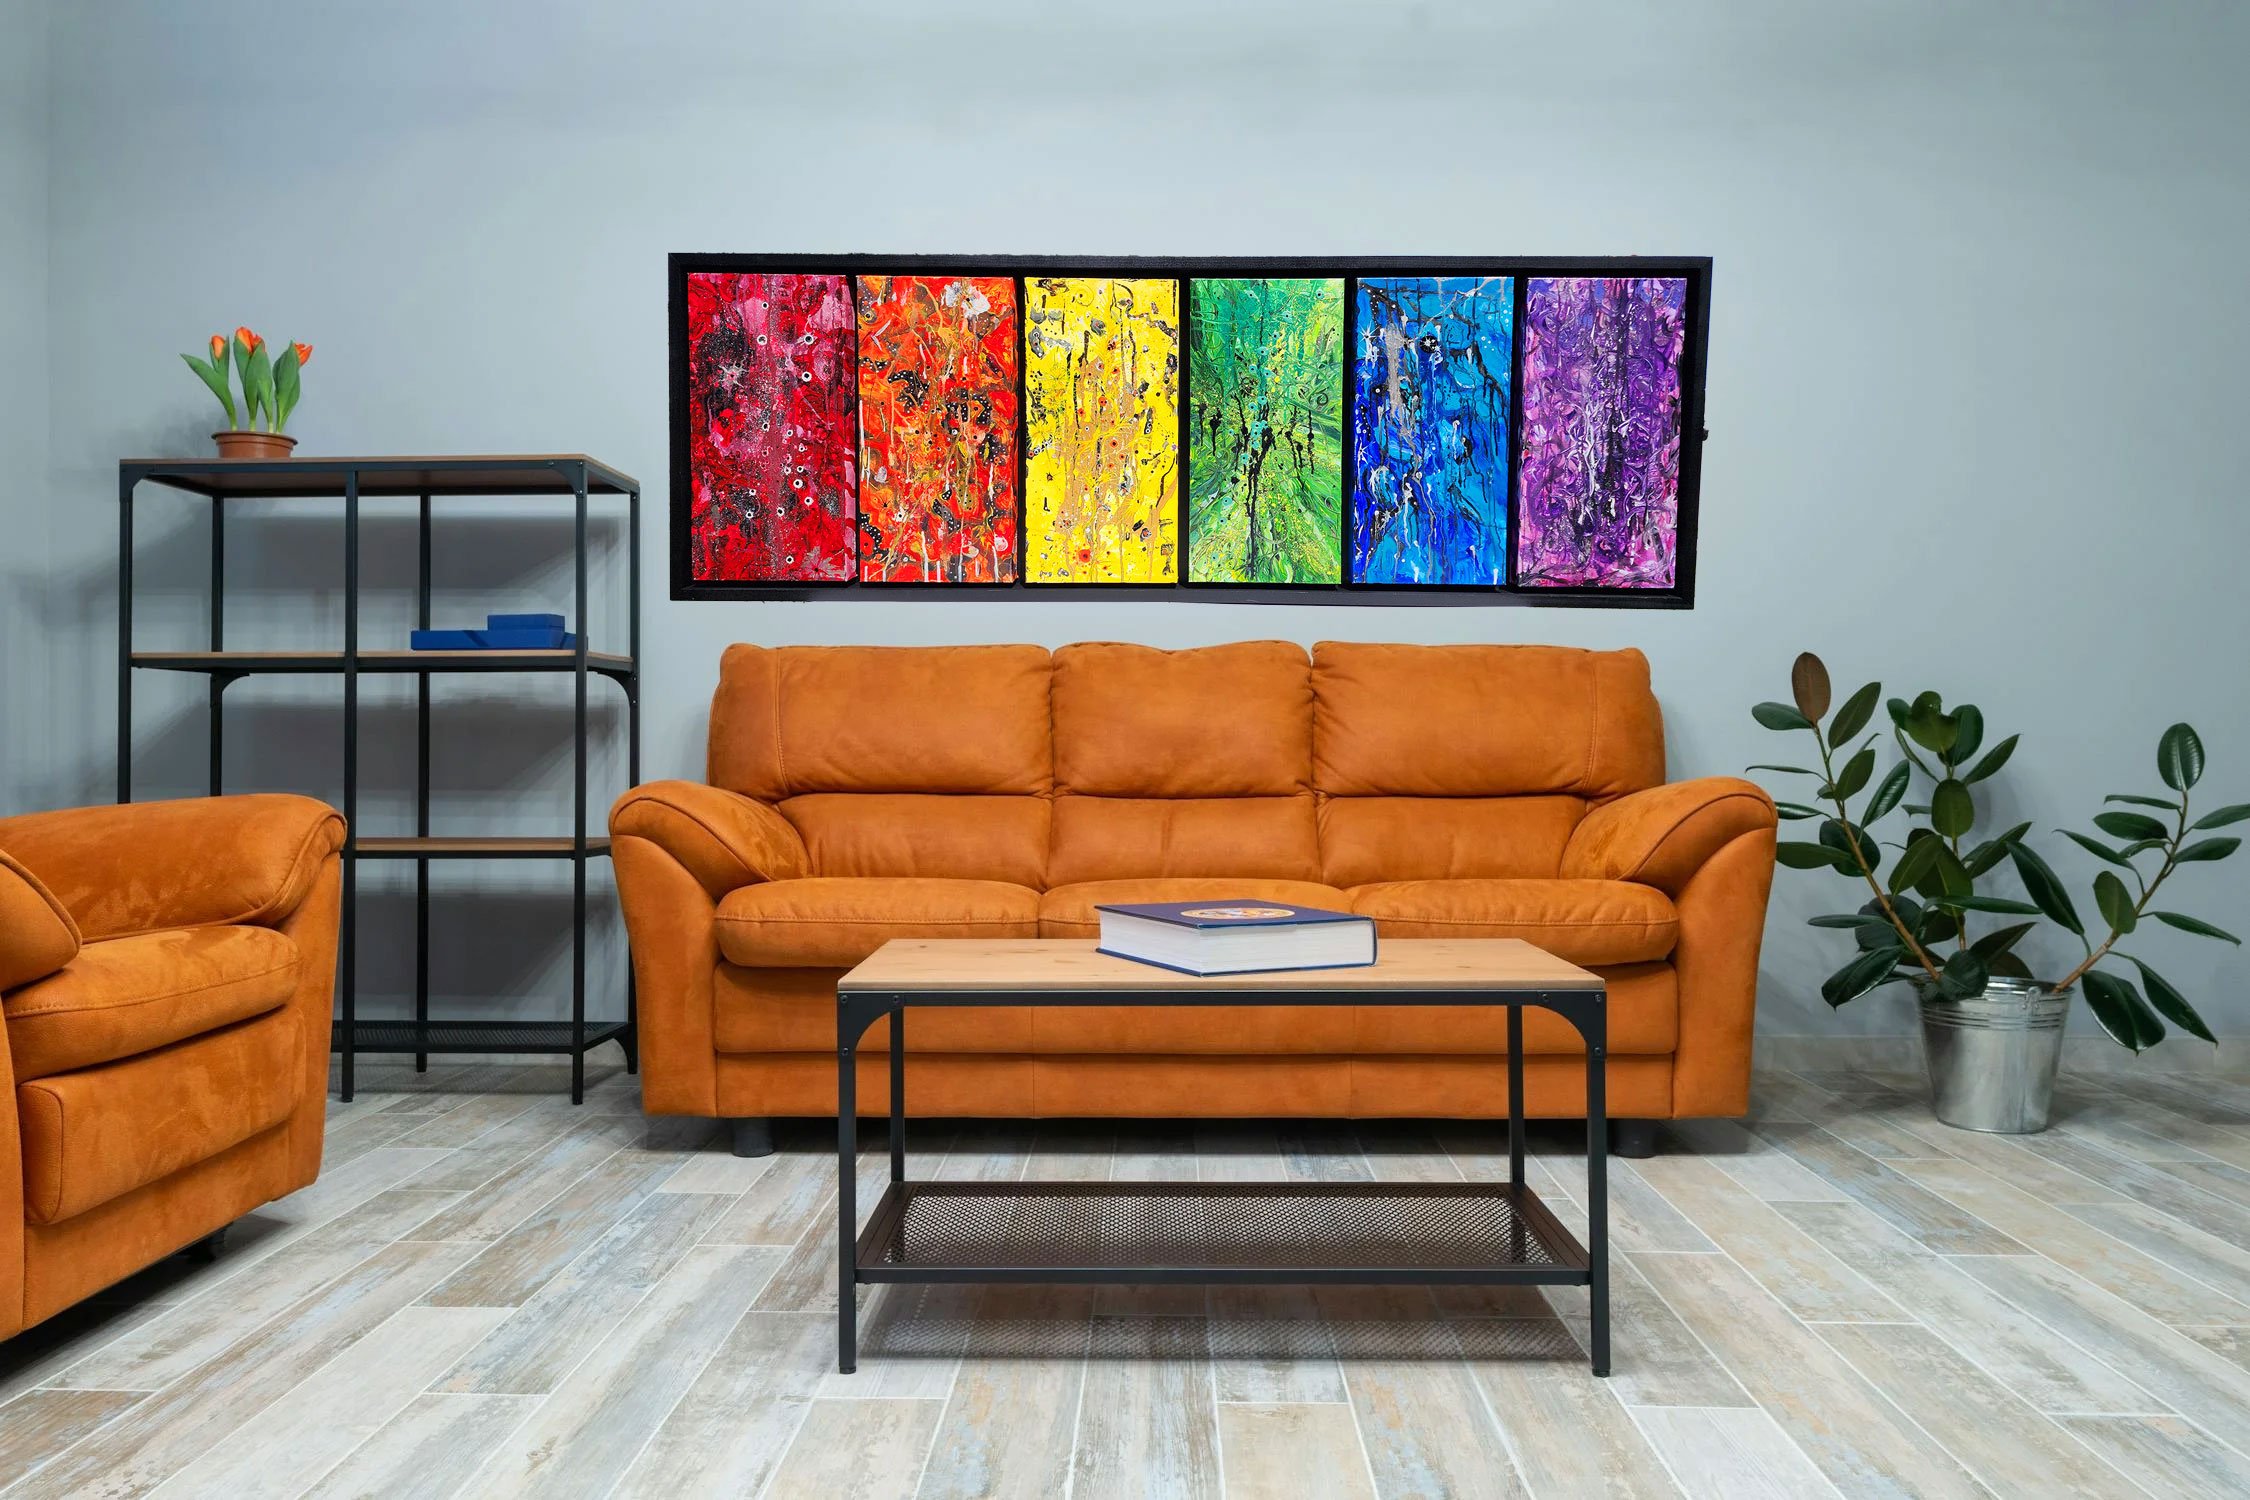 Abstract composition of six pieces of canvases all framed together. The work of art has a custom frame handmade with completely resistant, strong poplar wood and is already painted with a uniform black color. The frame already has some D-shaped hooks assembled, ready to hang in your beautiful home.